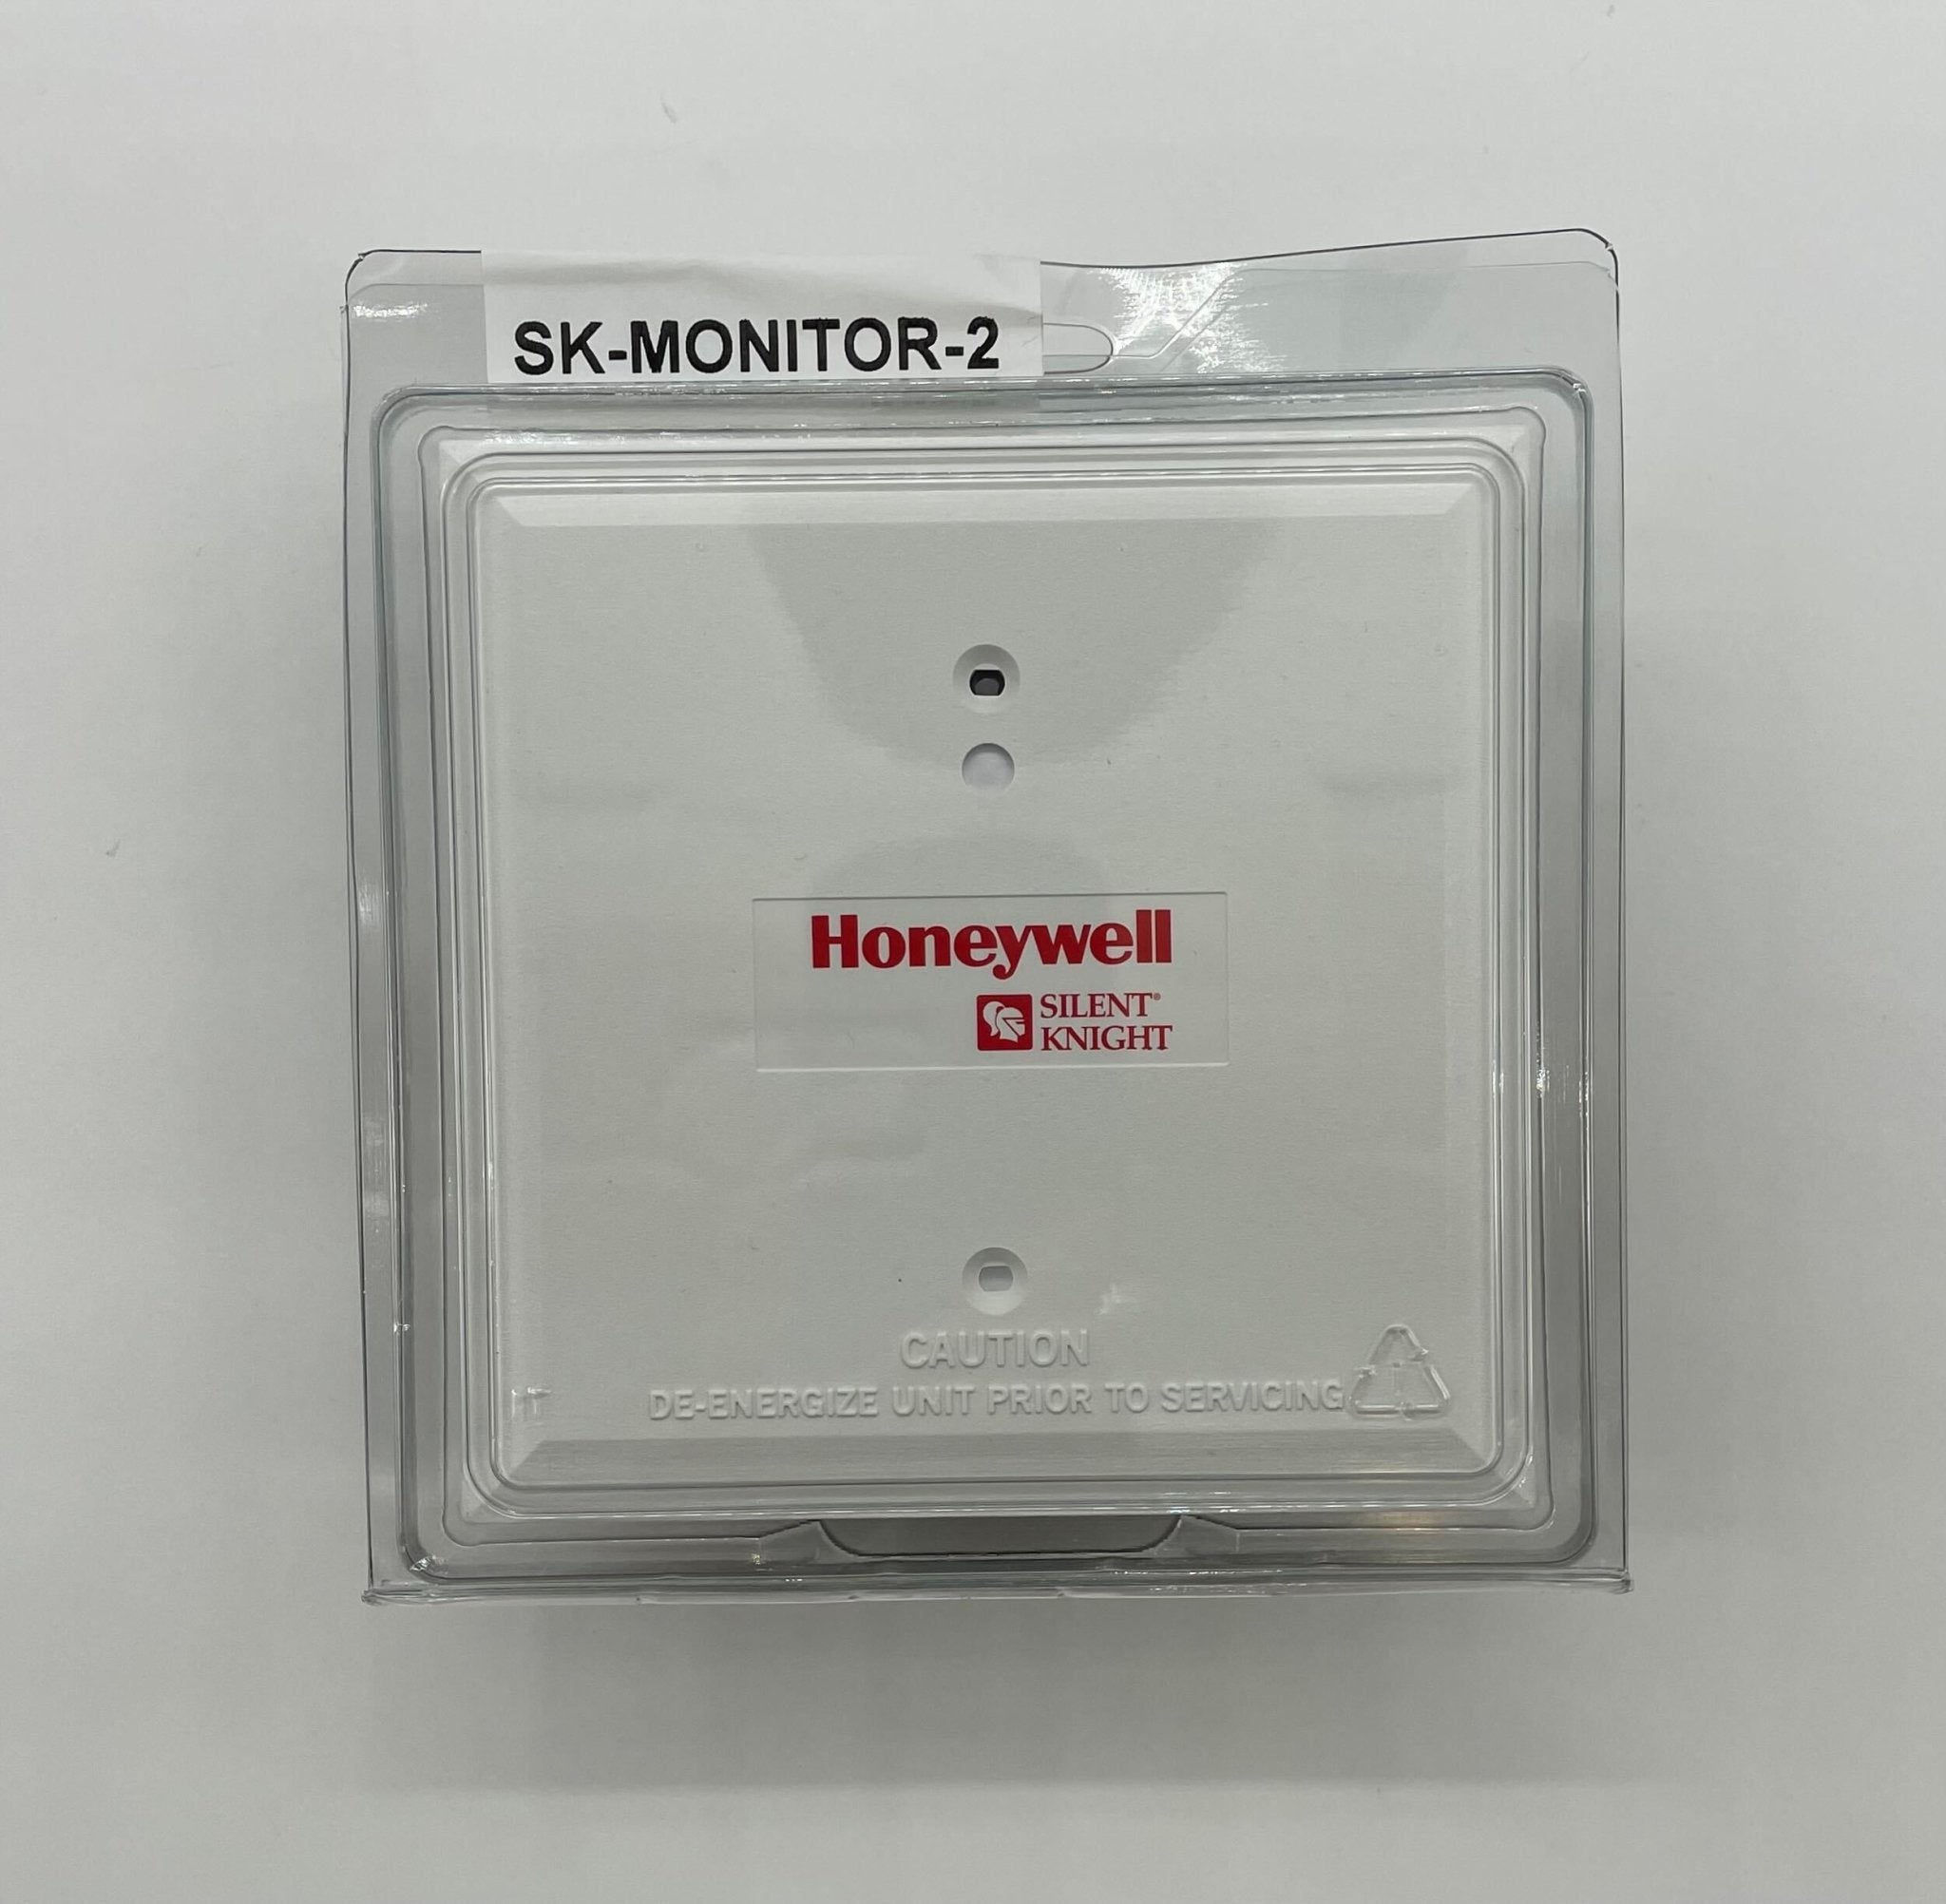 Silent Knight SK-MONITOR-2 - The Fire Alarm Supplier